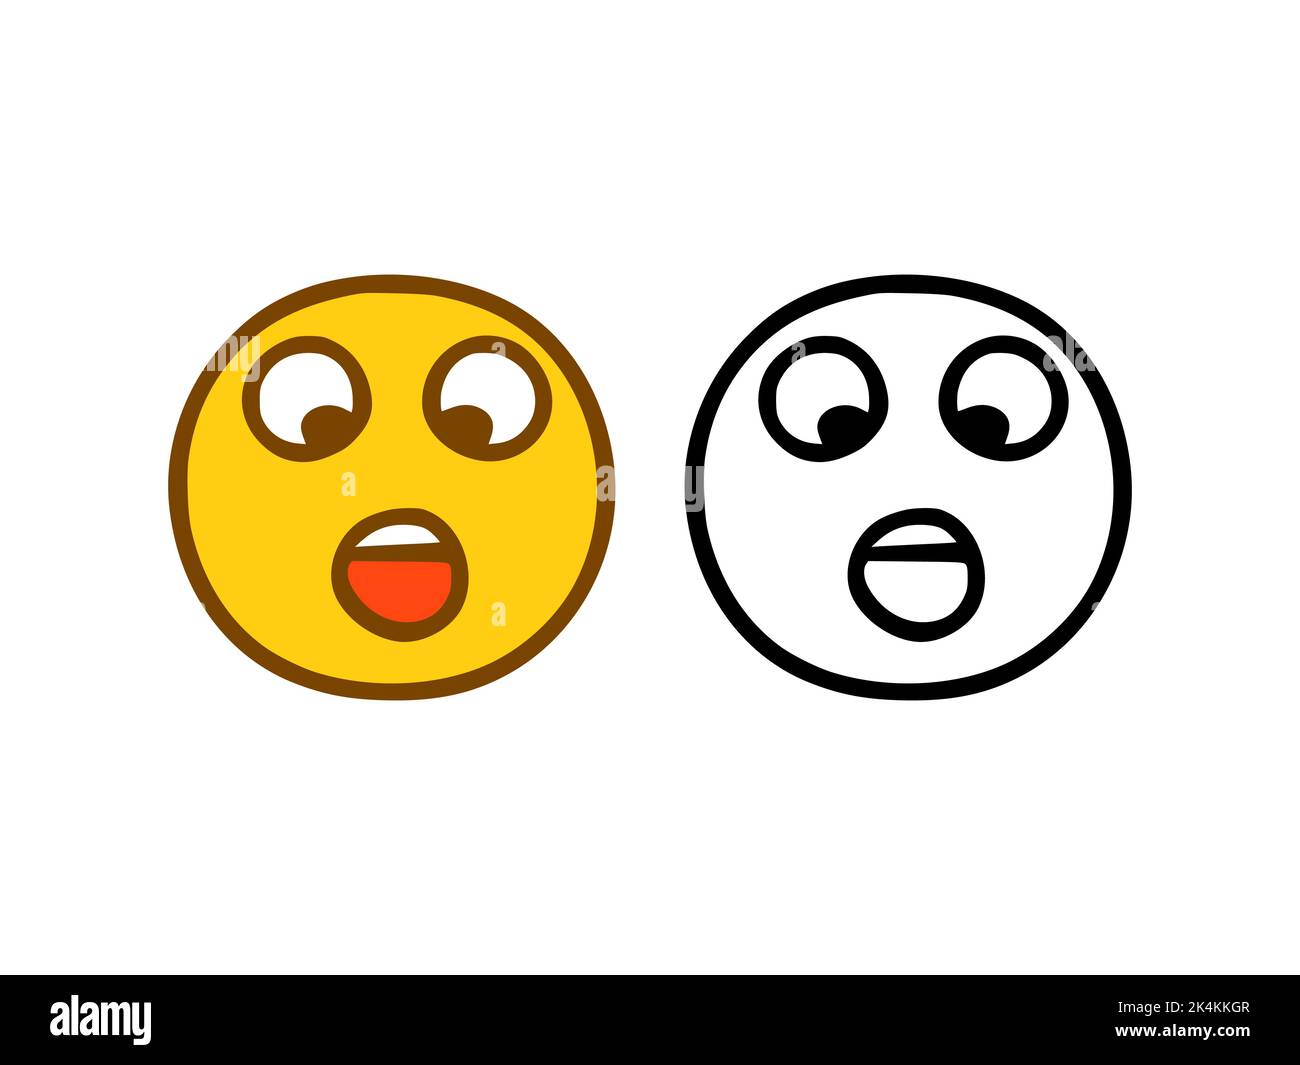 Silly face emoticon in doodle style isolated on white background Stock Vector